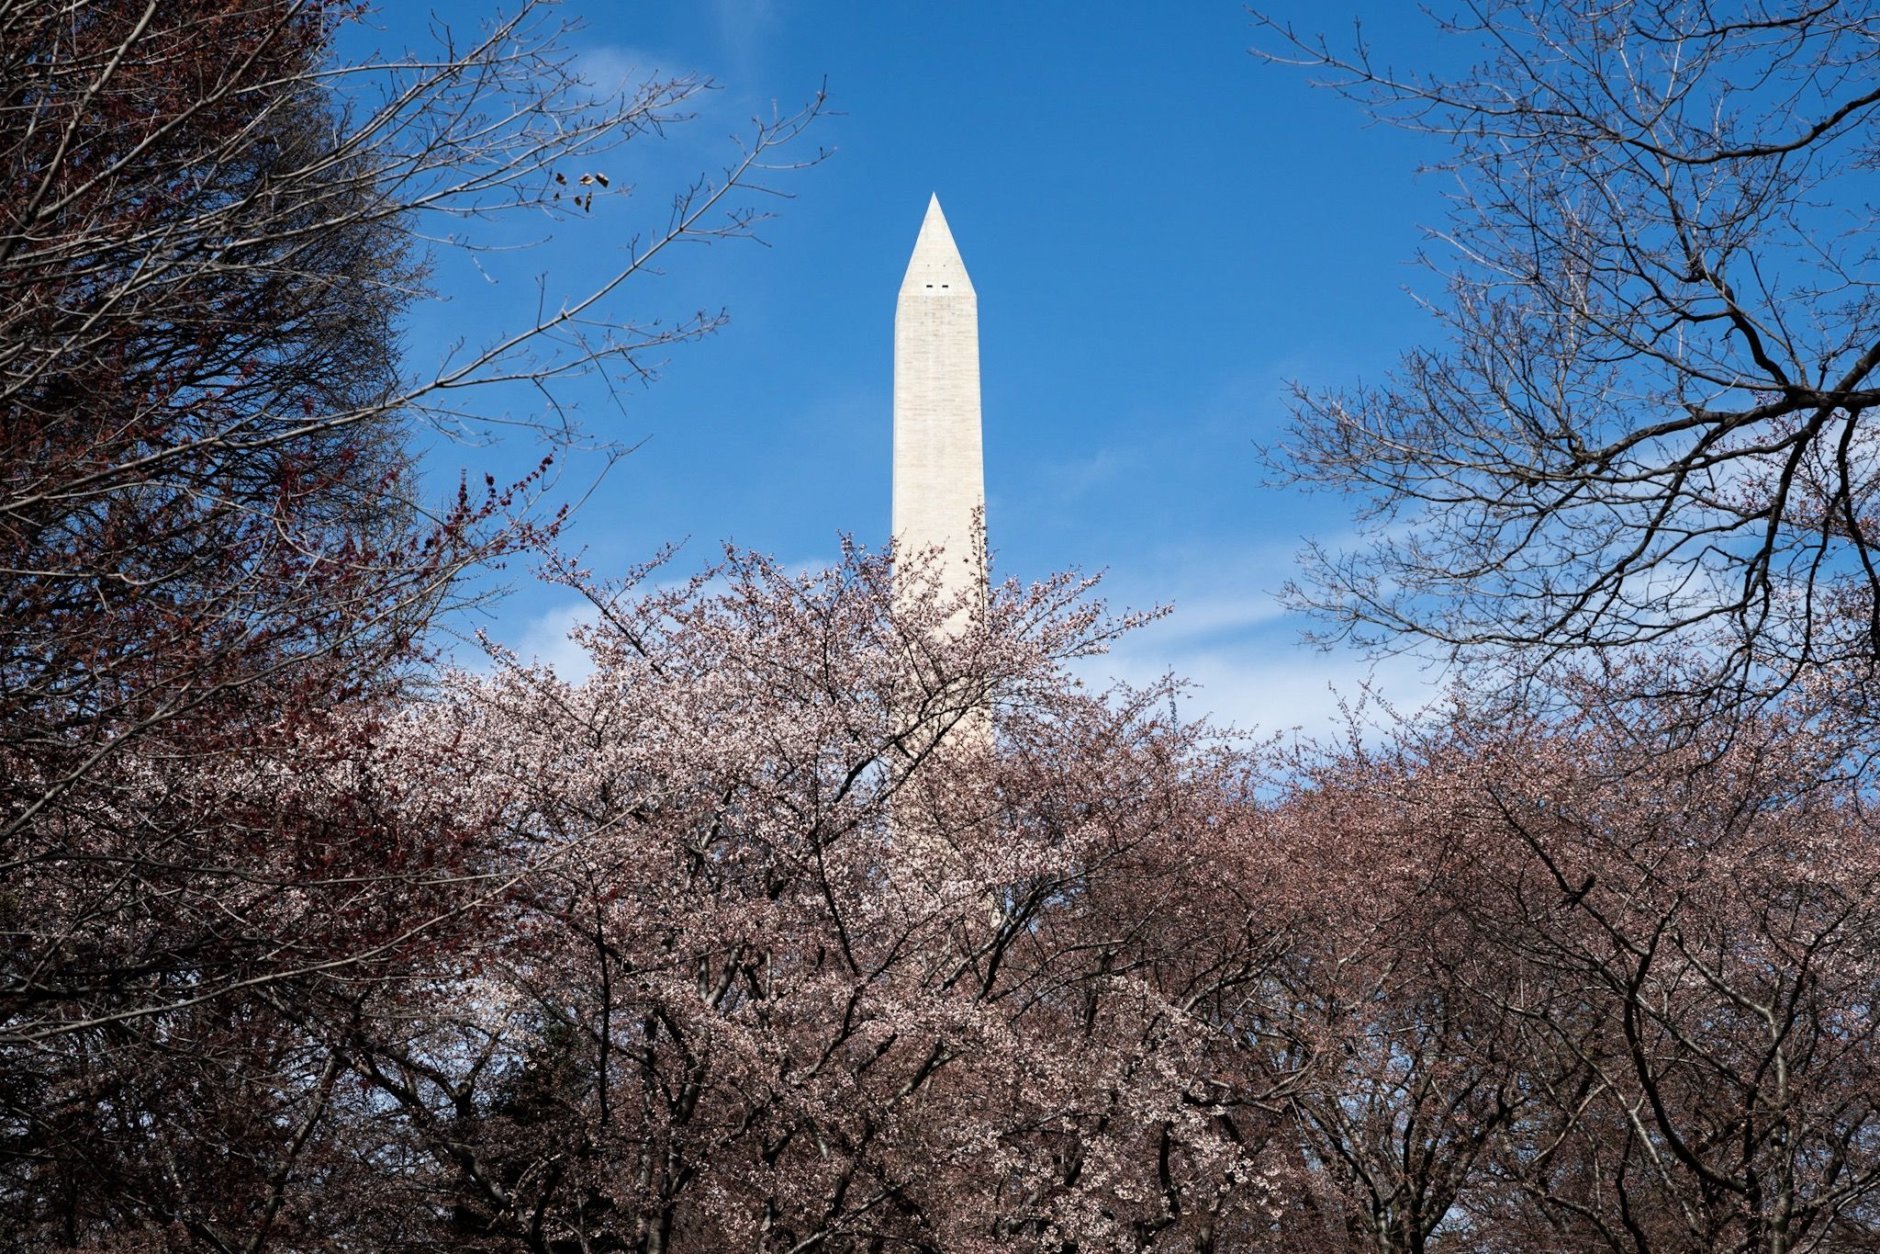 The Washington Monument towers above white and pink cherry trees on the National Mall. The eastern shore of the Tidal Basin makes for excellent views of the monument with cherry trees in the foreground. (WTOP/Alejandro Alvarez)